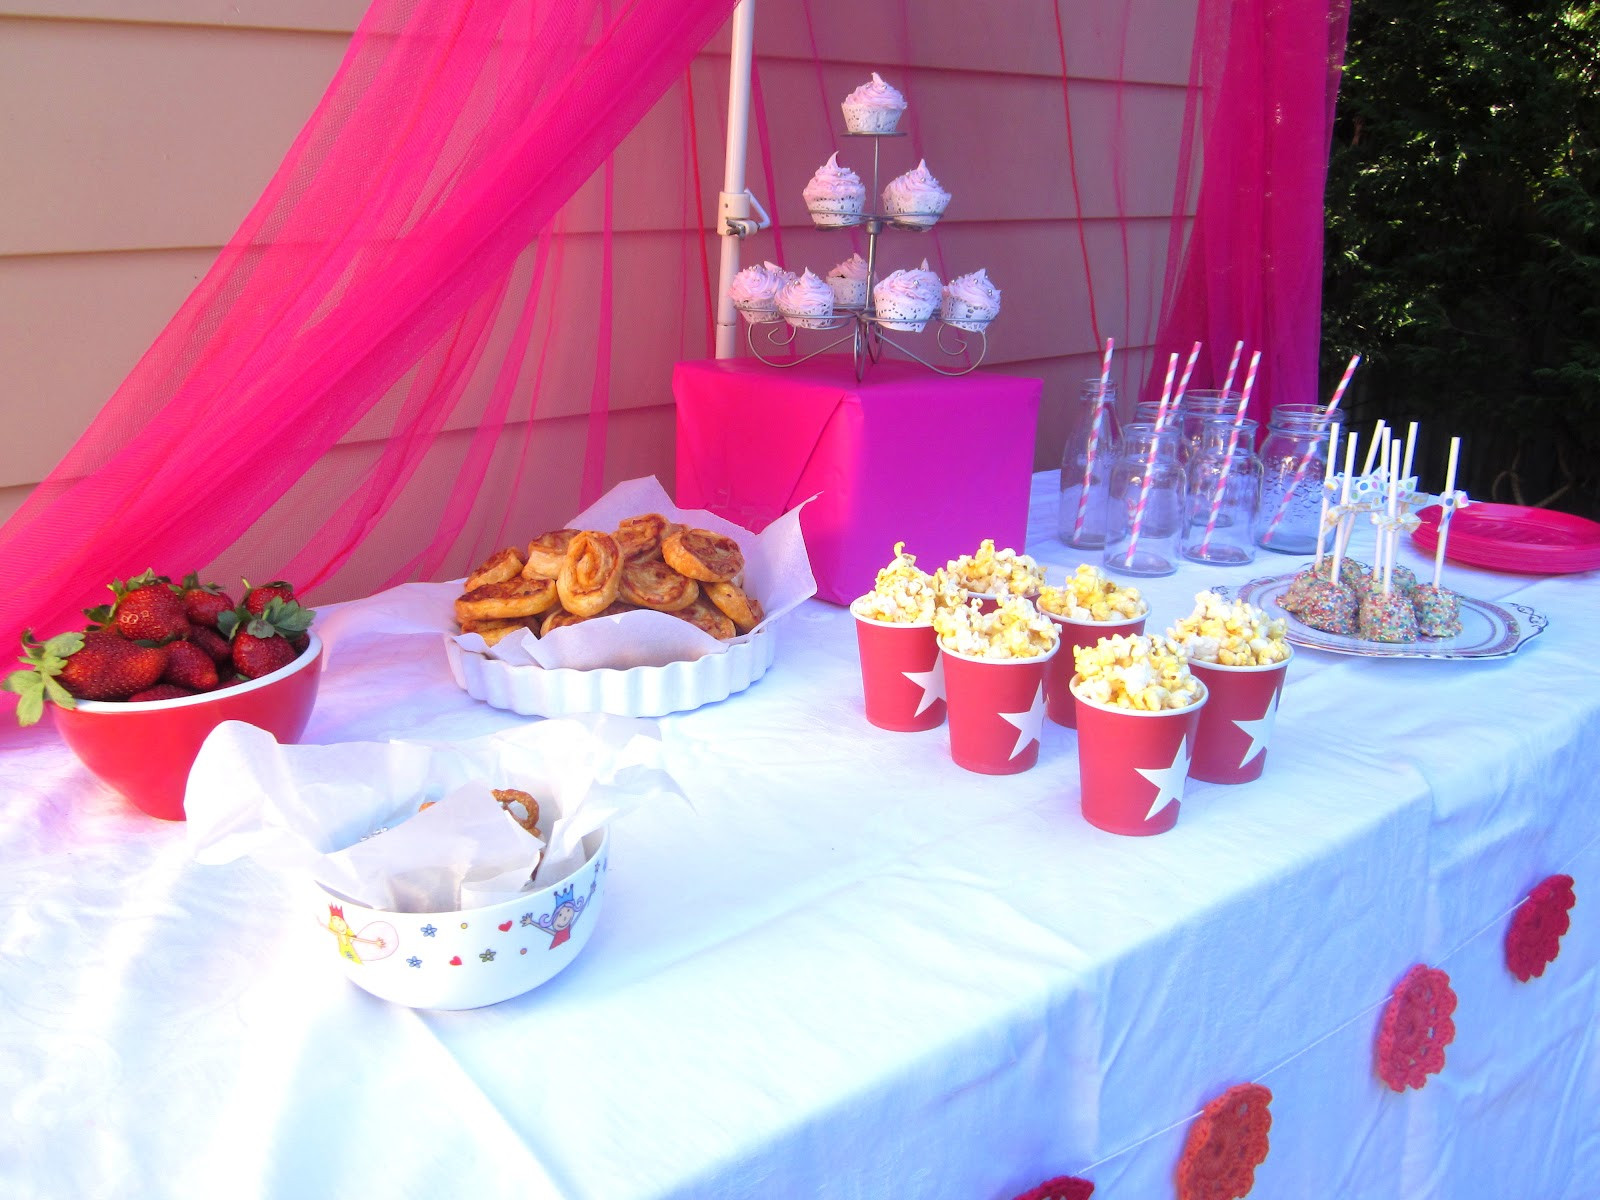 Girl Birthday Party Food Ideas
 Desire Empire Simple Food Ideas for a LIttle Girls Party